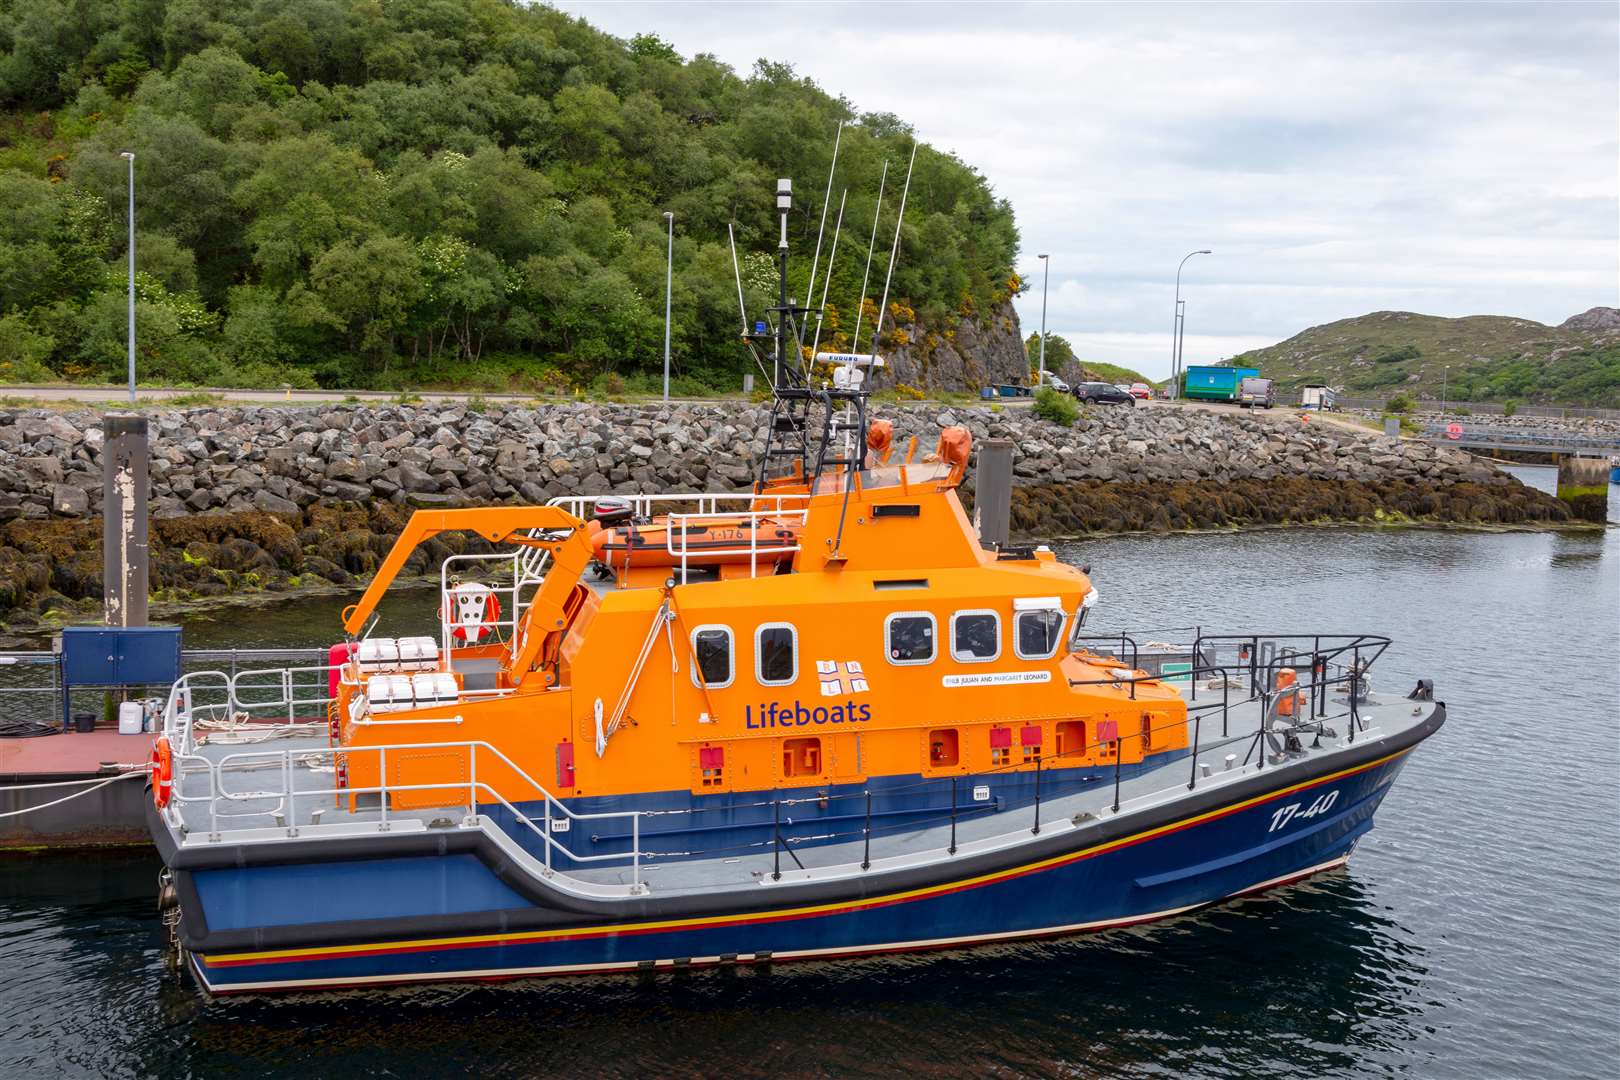 The RNLB Julian and Margaret Leonard at Lochinver. Put into service in 2003 this is one of the RNLB's Severn Class lifeboats - the largest they operate with an working range of 50 miles.